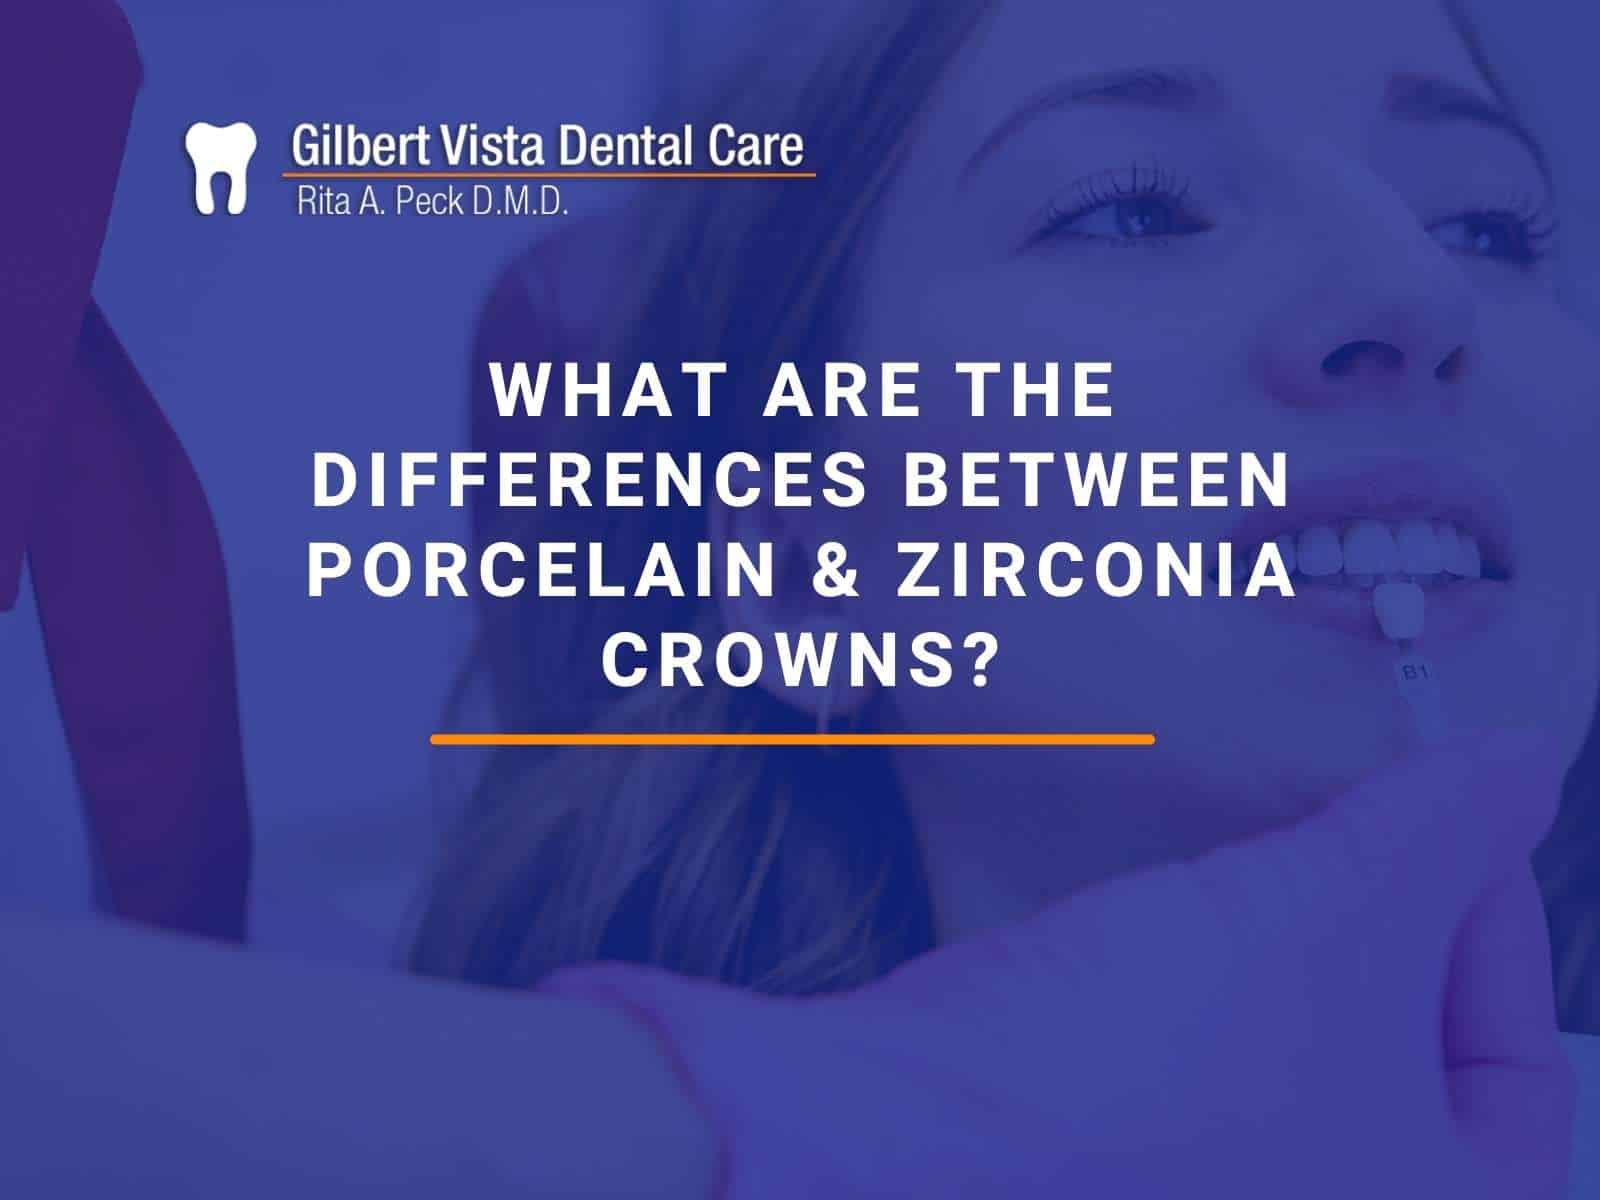 What Are The Differences Between Porcelain & Zirconia Crowns